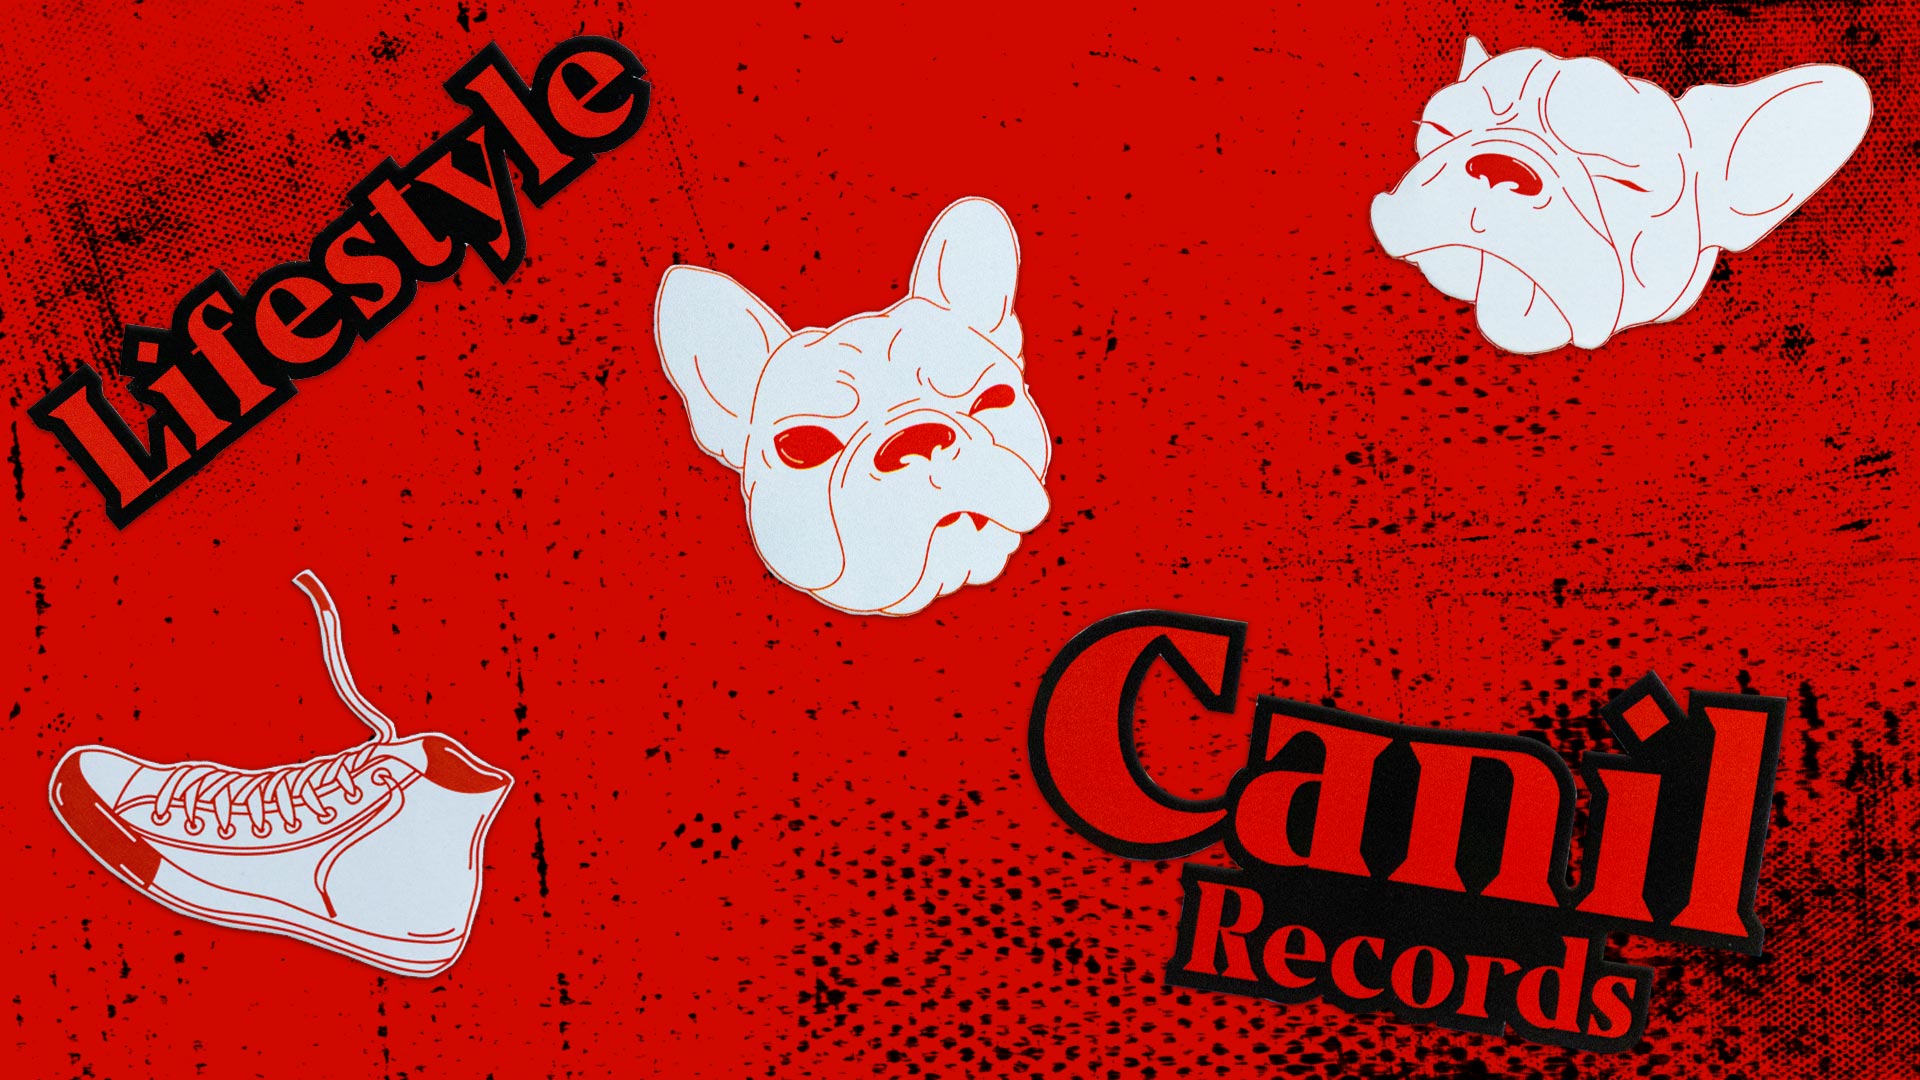 Cail Records